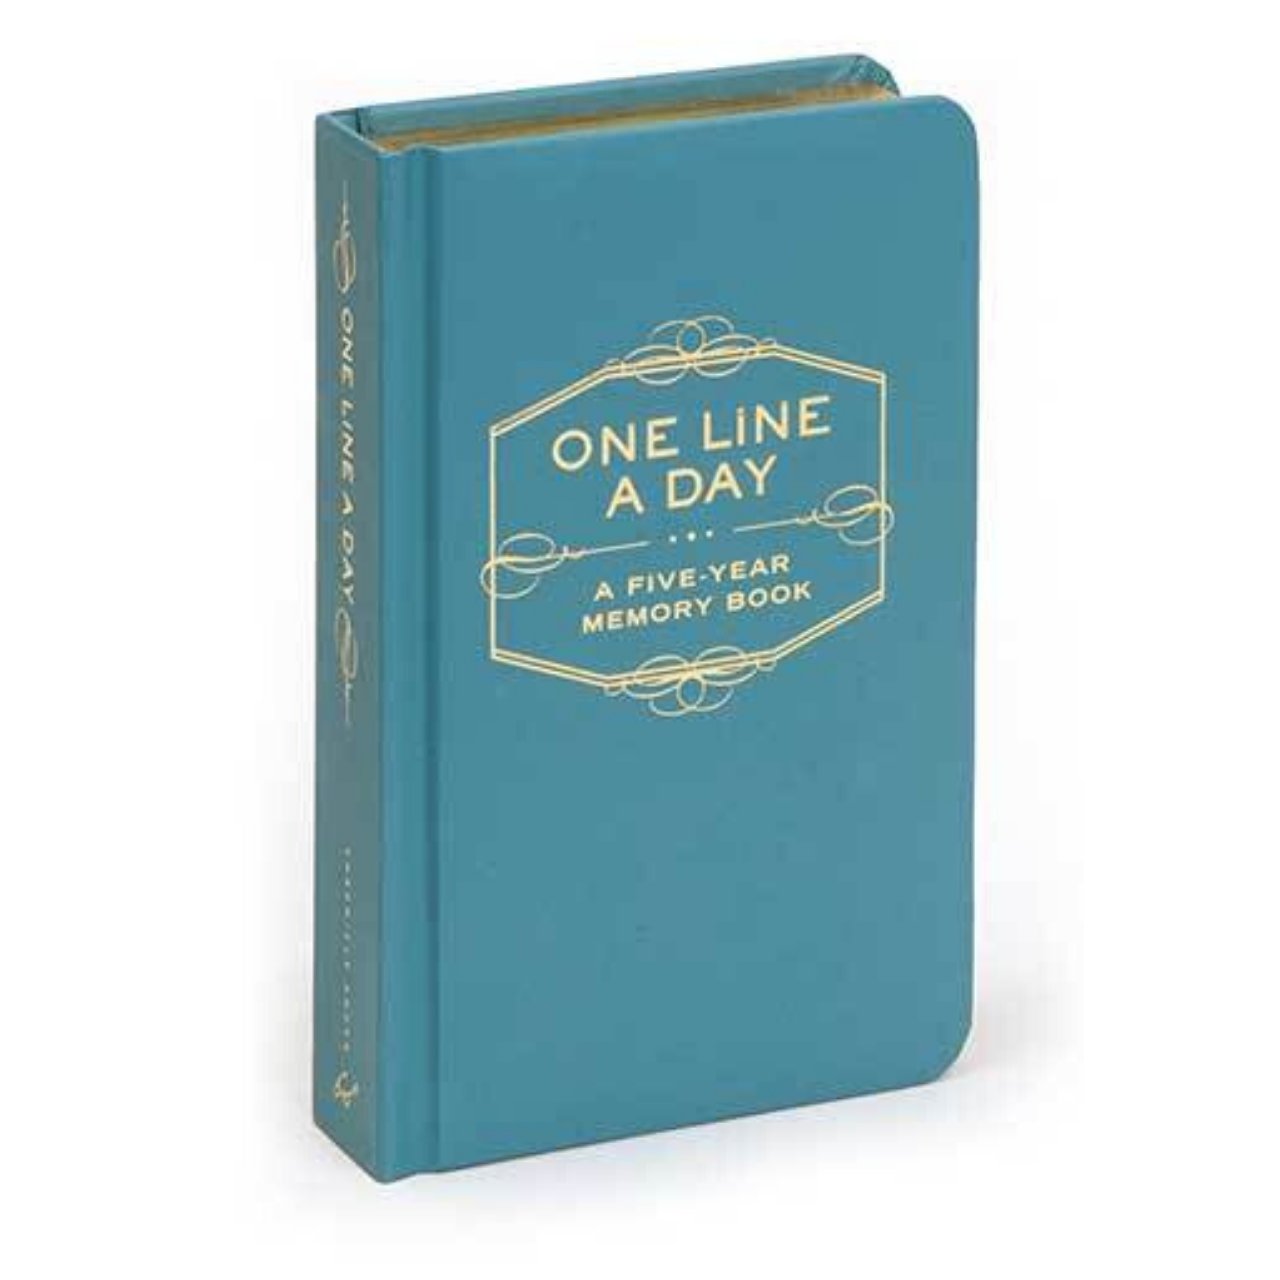 49a73d27hachette_classic_one_line_a_day_book.png